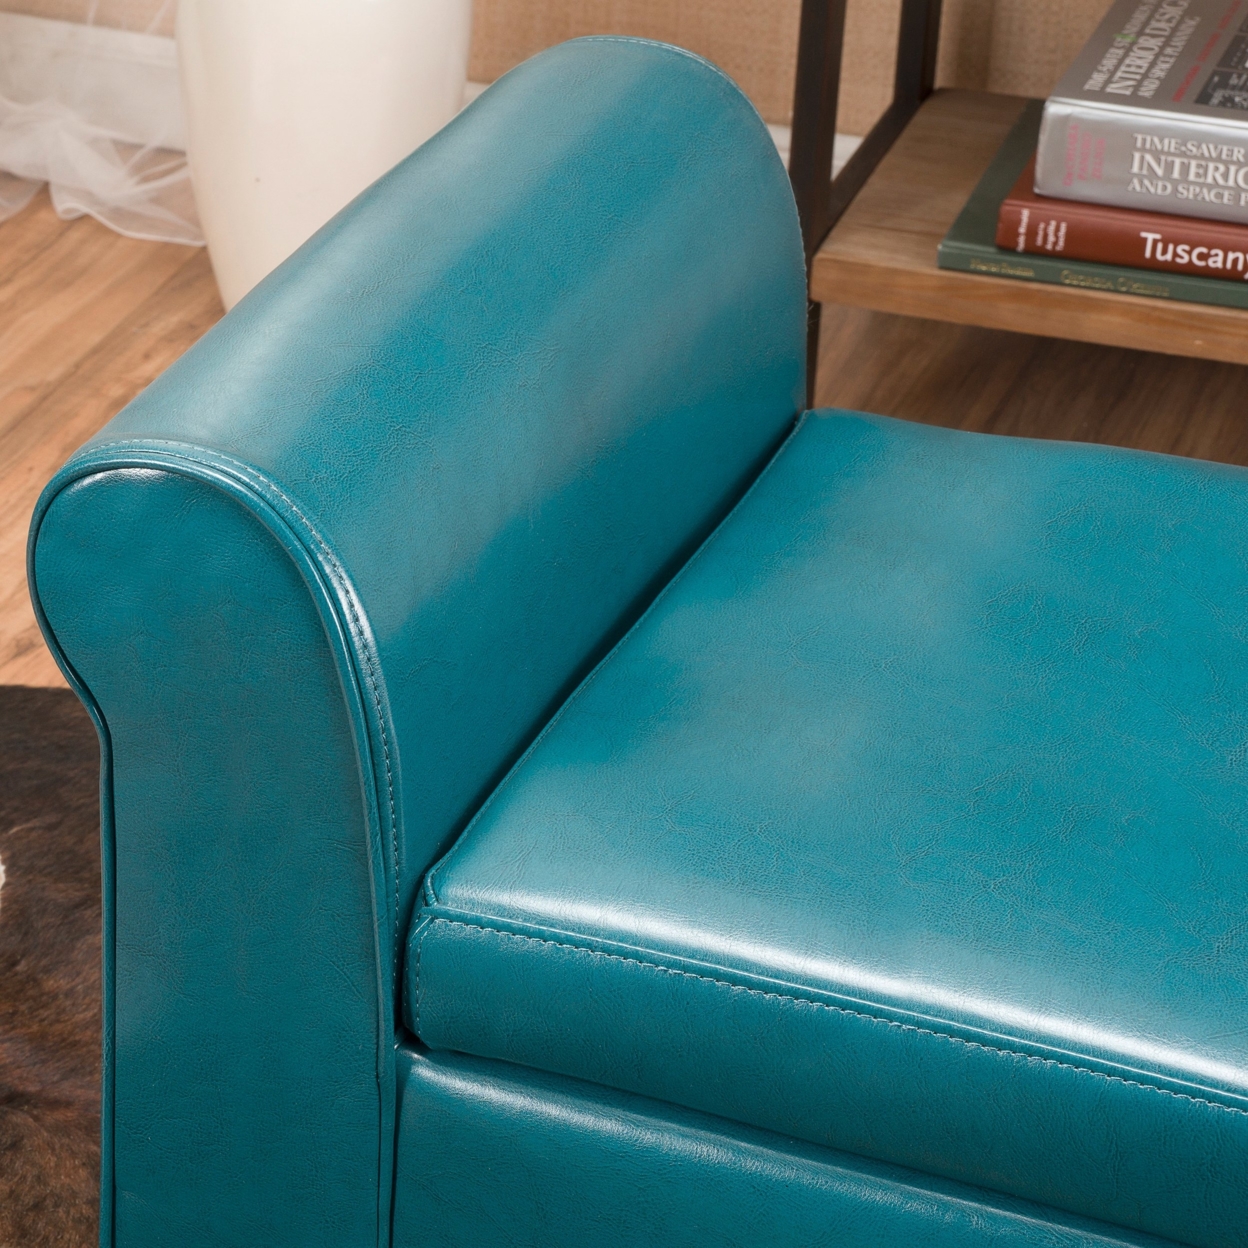 Danbury Teal Leather Armed Storage Ottoman Bench